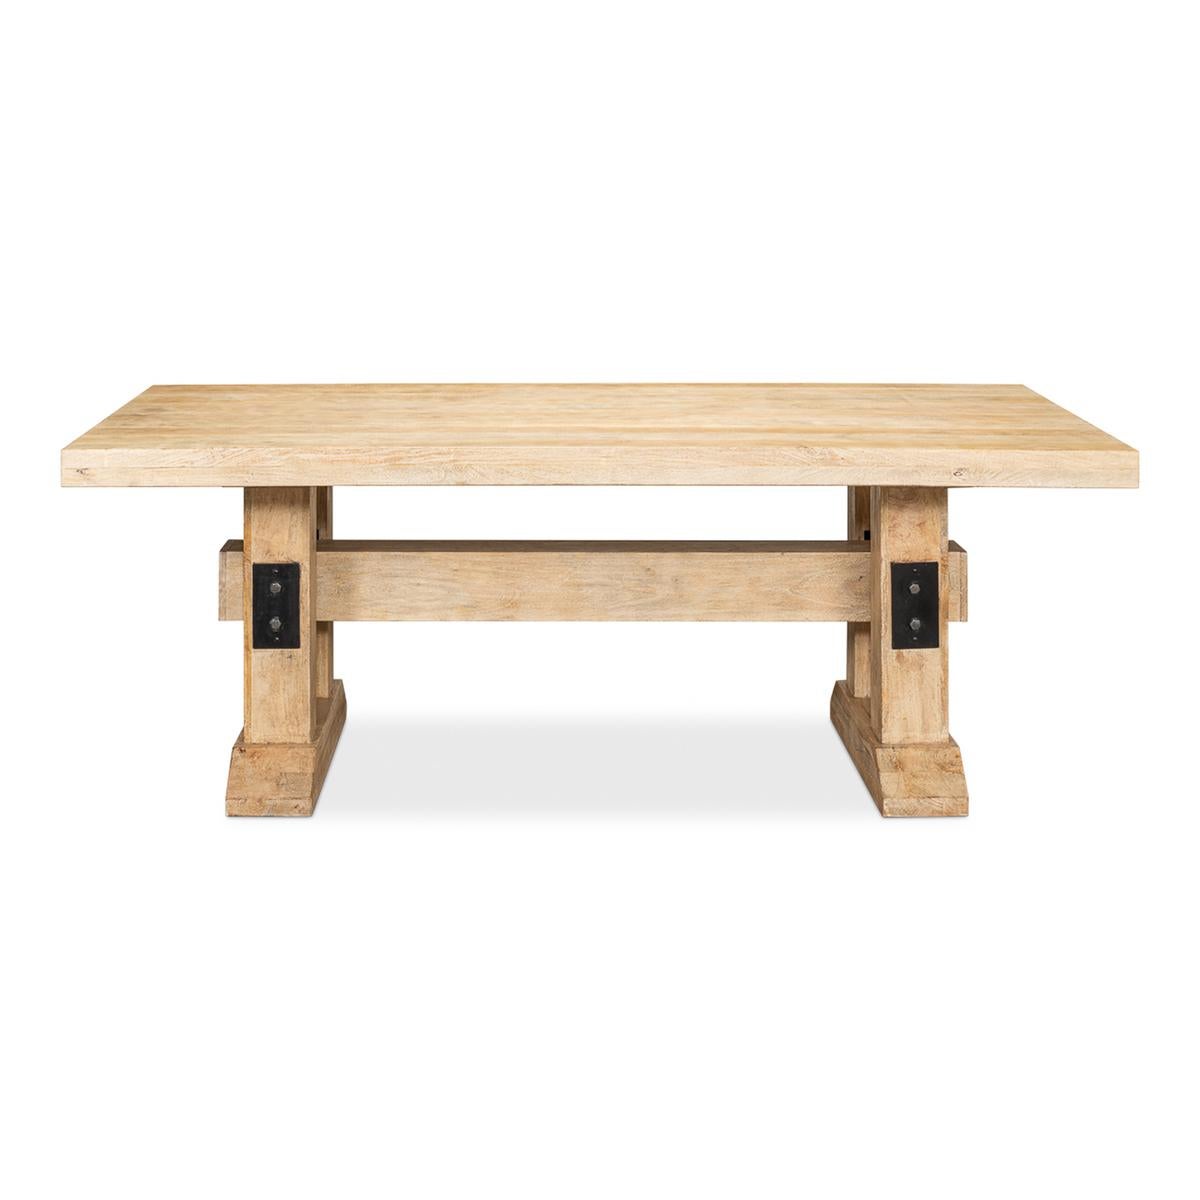 Natural Industrial Farmhouse dining table. In our Sienna finish, this natural wood dining table is constructed of solid wood and sits on two massive block pedestals anchored together with an equally massive beam all held together with industrial